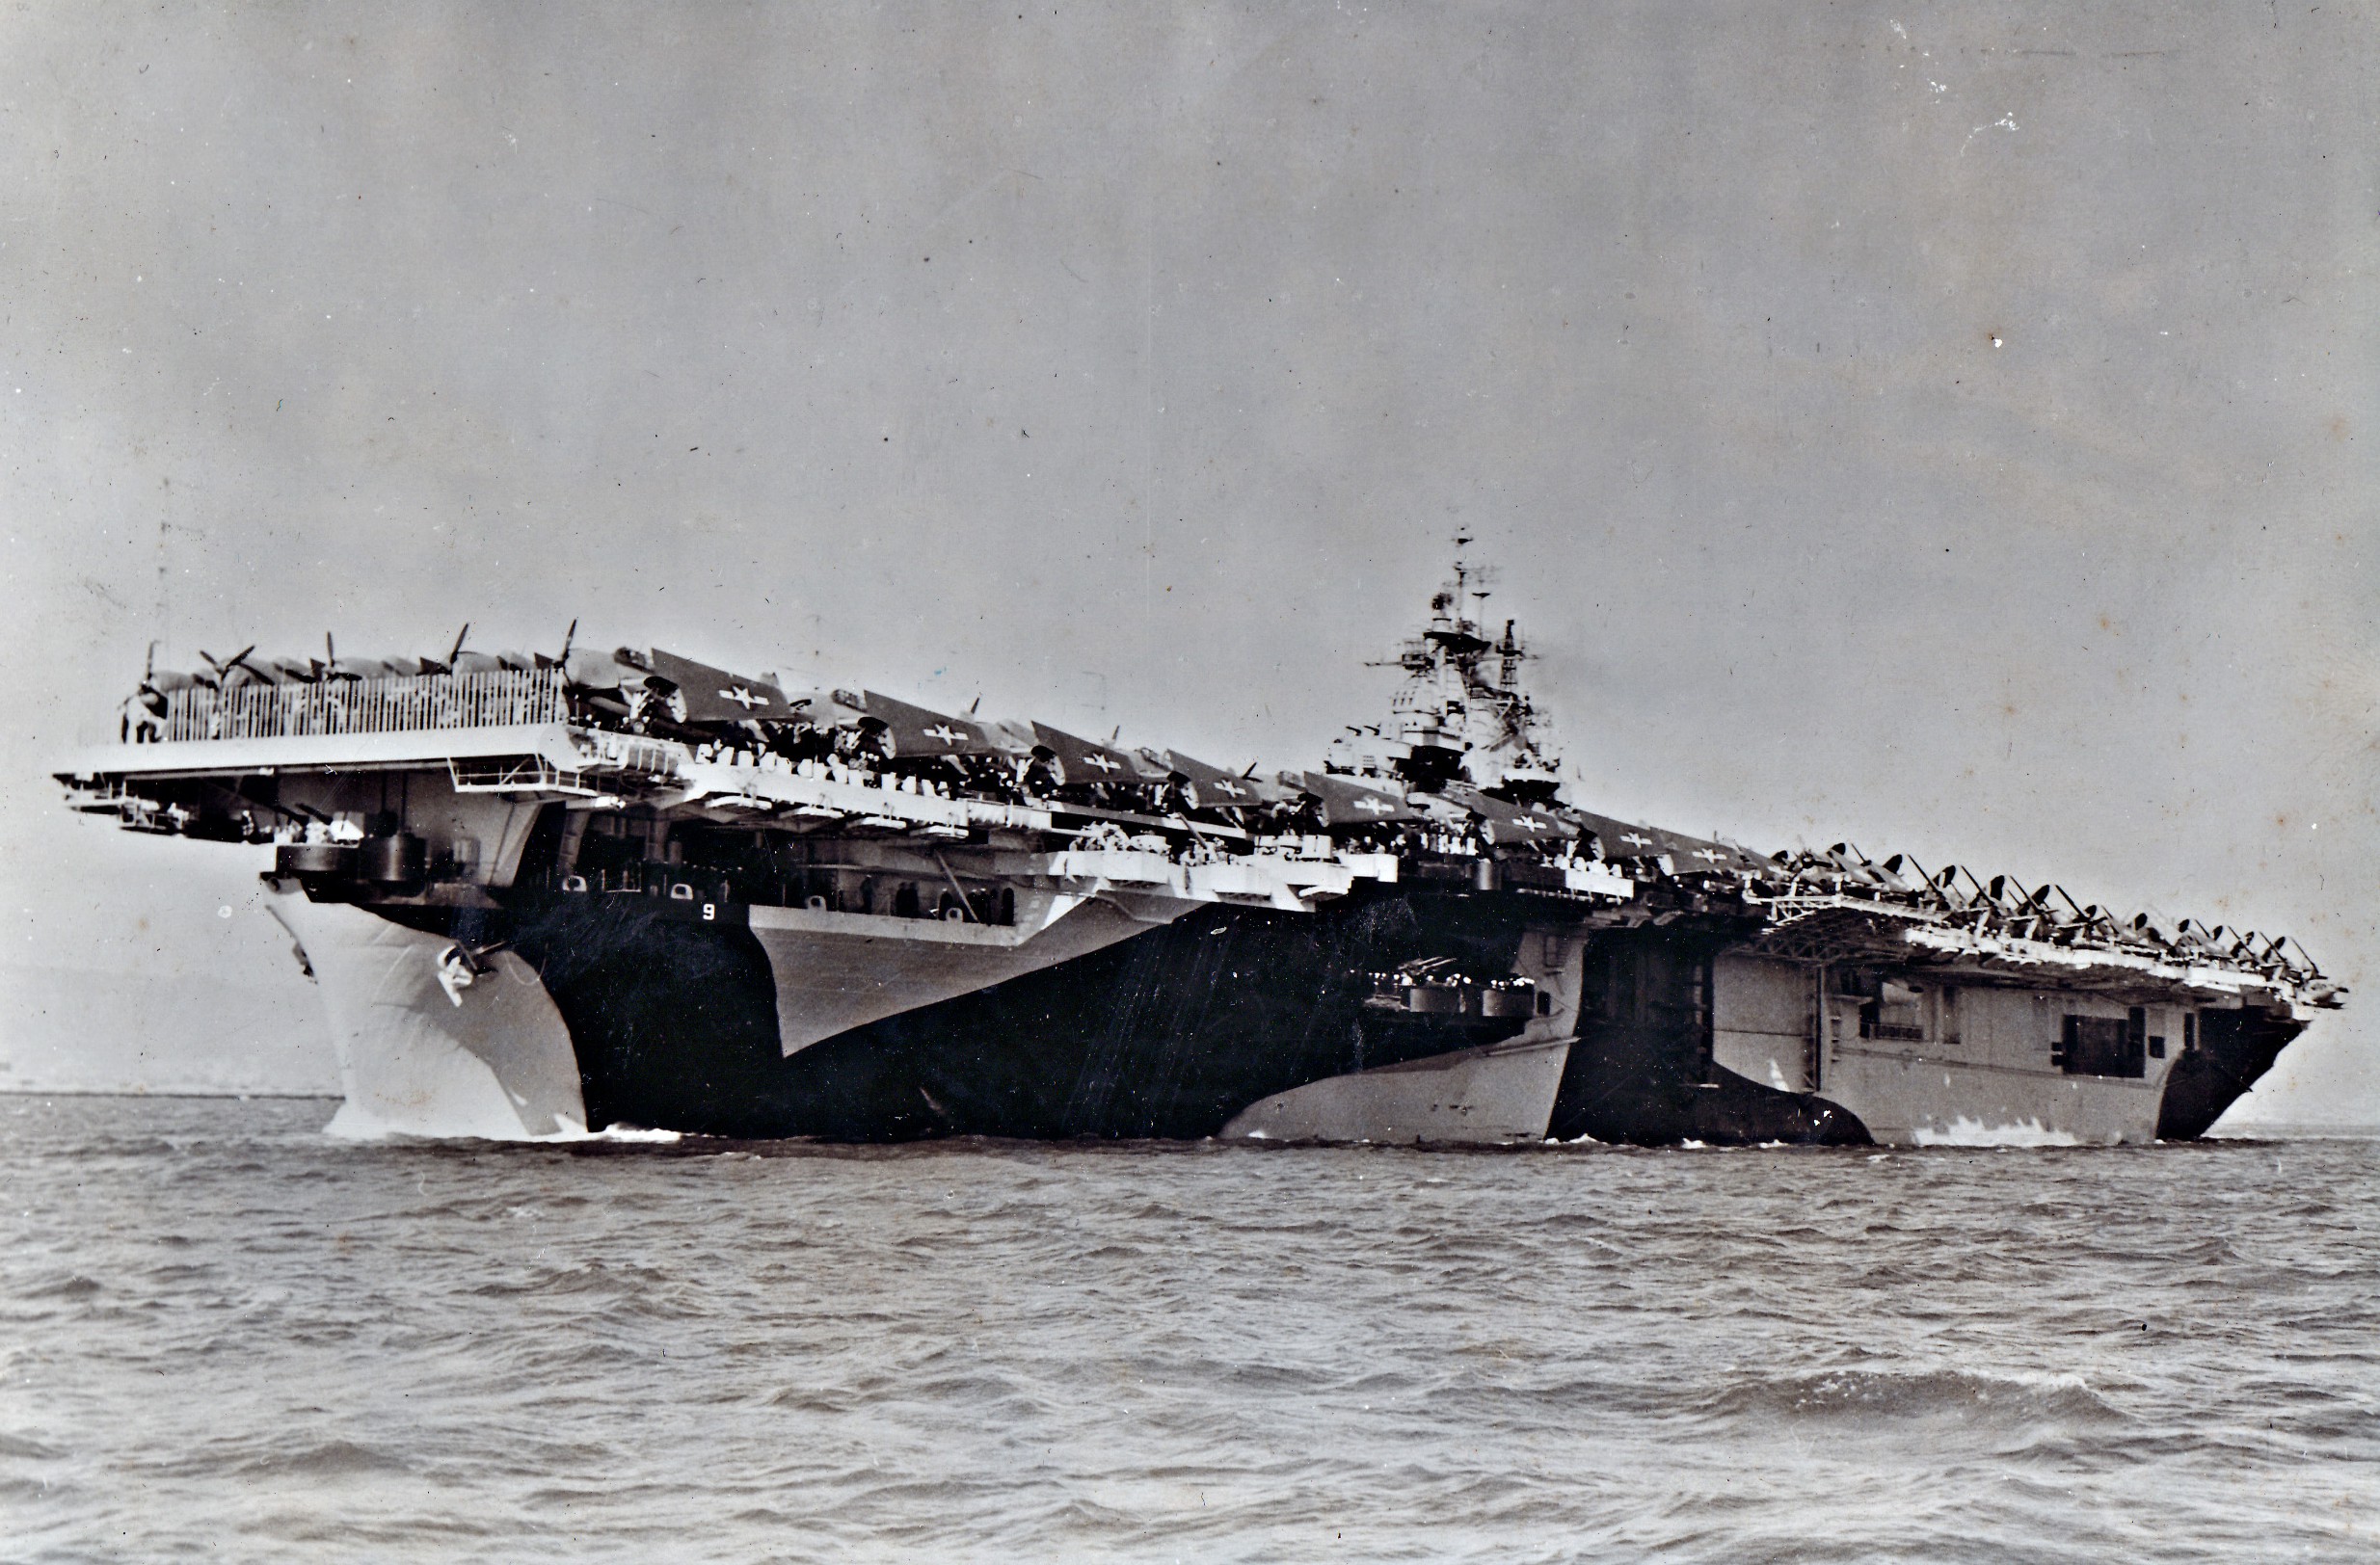 USS Essex departing San Francisco Naval Shipyard, California, United States, 15 Apr 1944, photo 2 of 4; note camouflage measure 32 design 6/10D